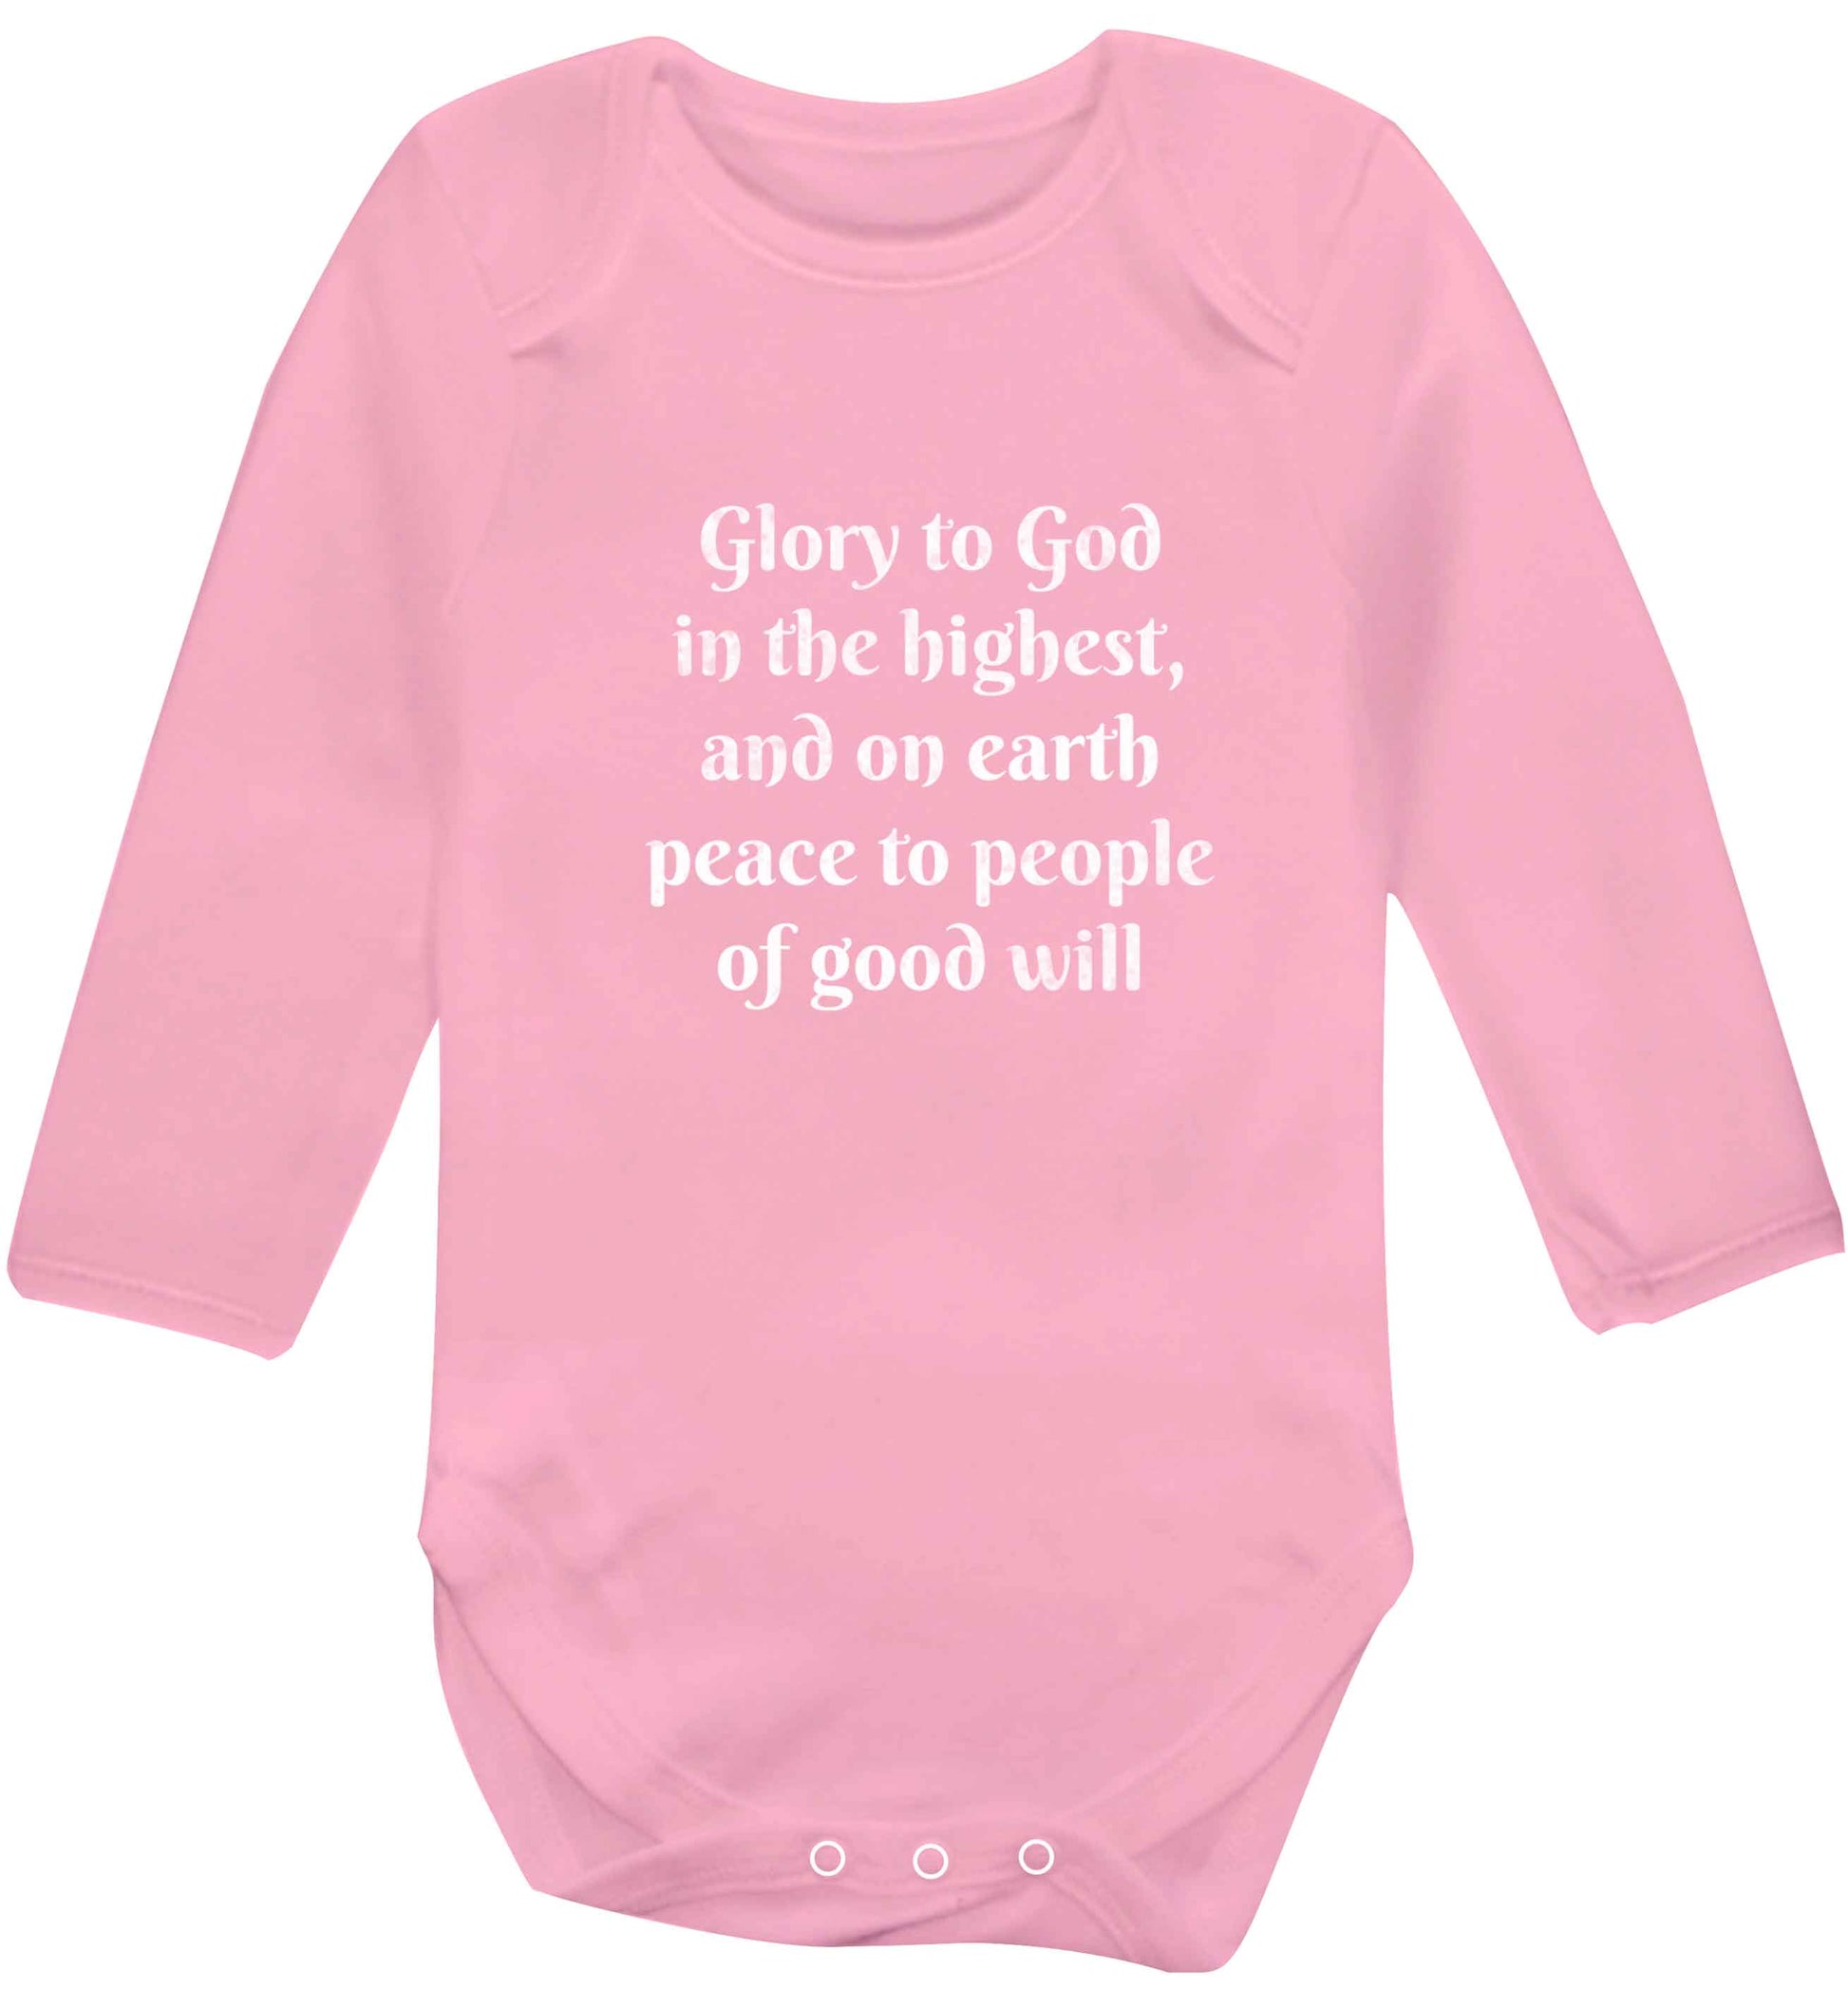 Glory to God in the highest, and on earth peace to people of good will baby vest long sleeved pale pink 6-12 months